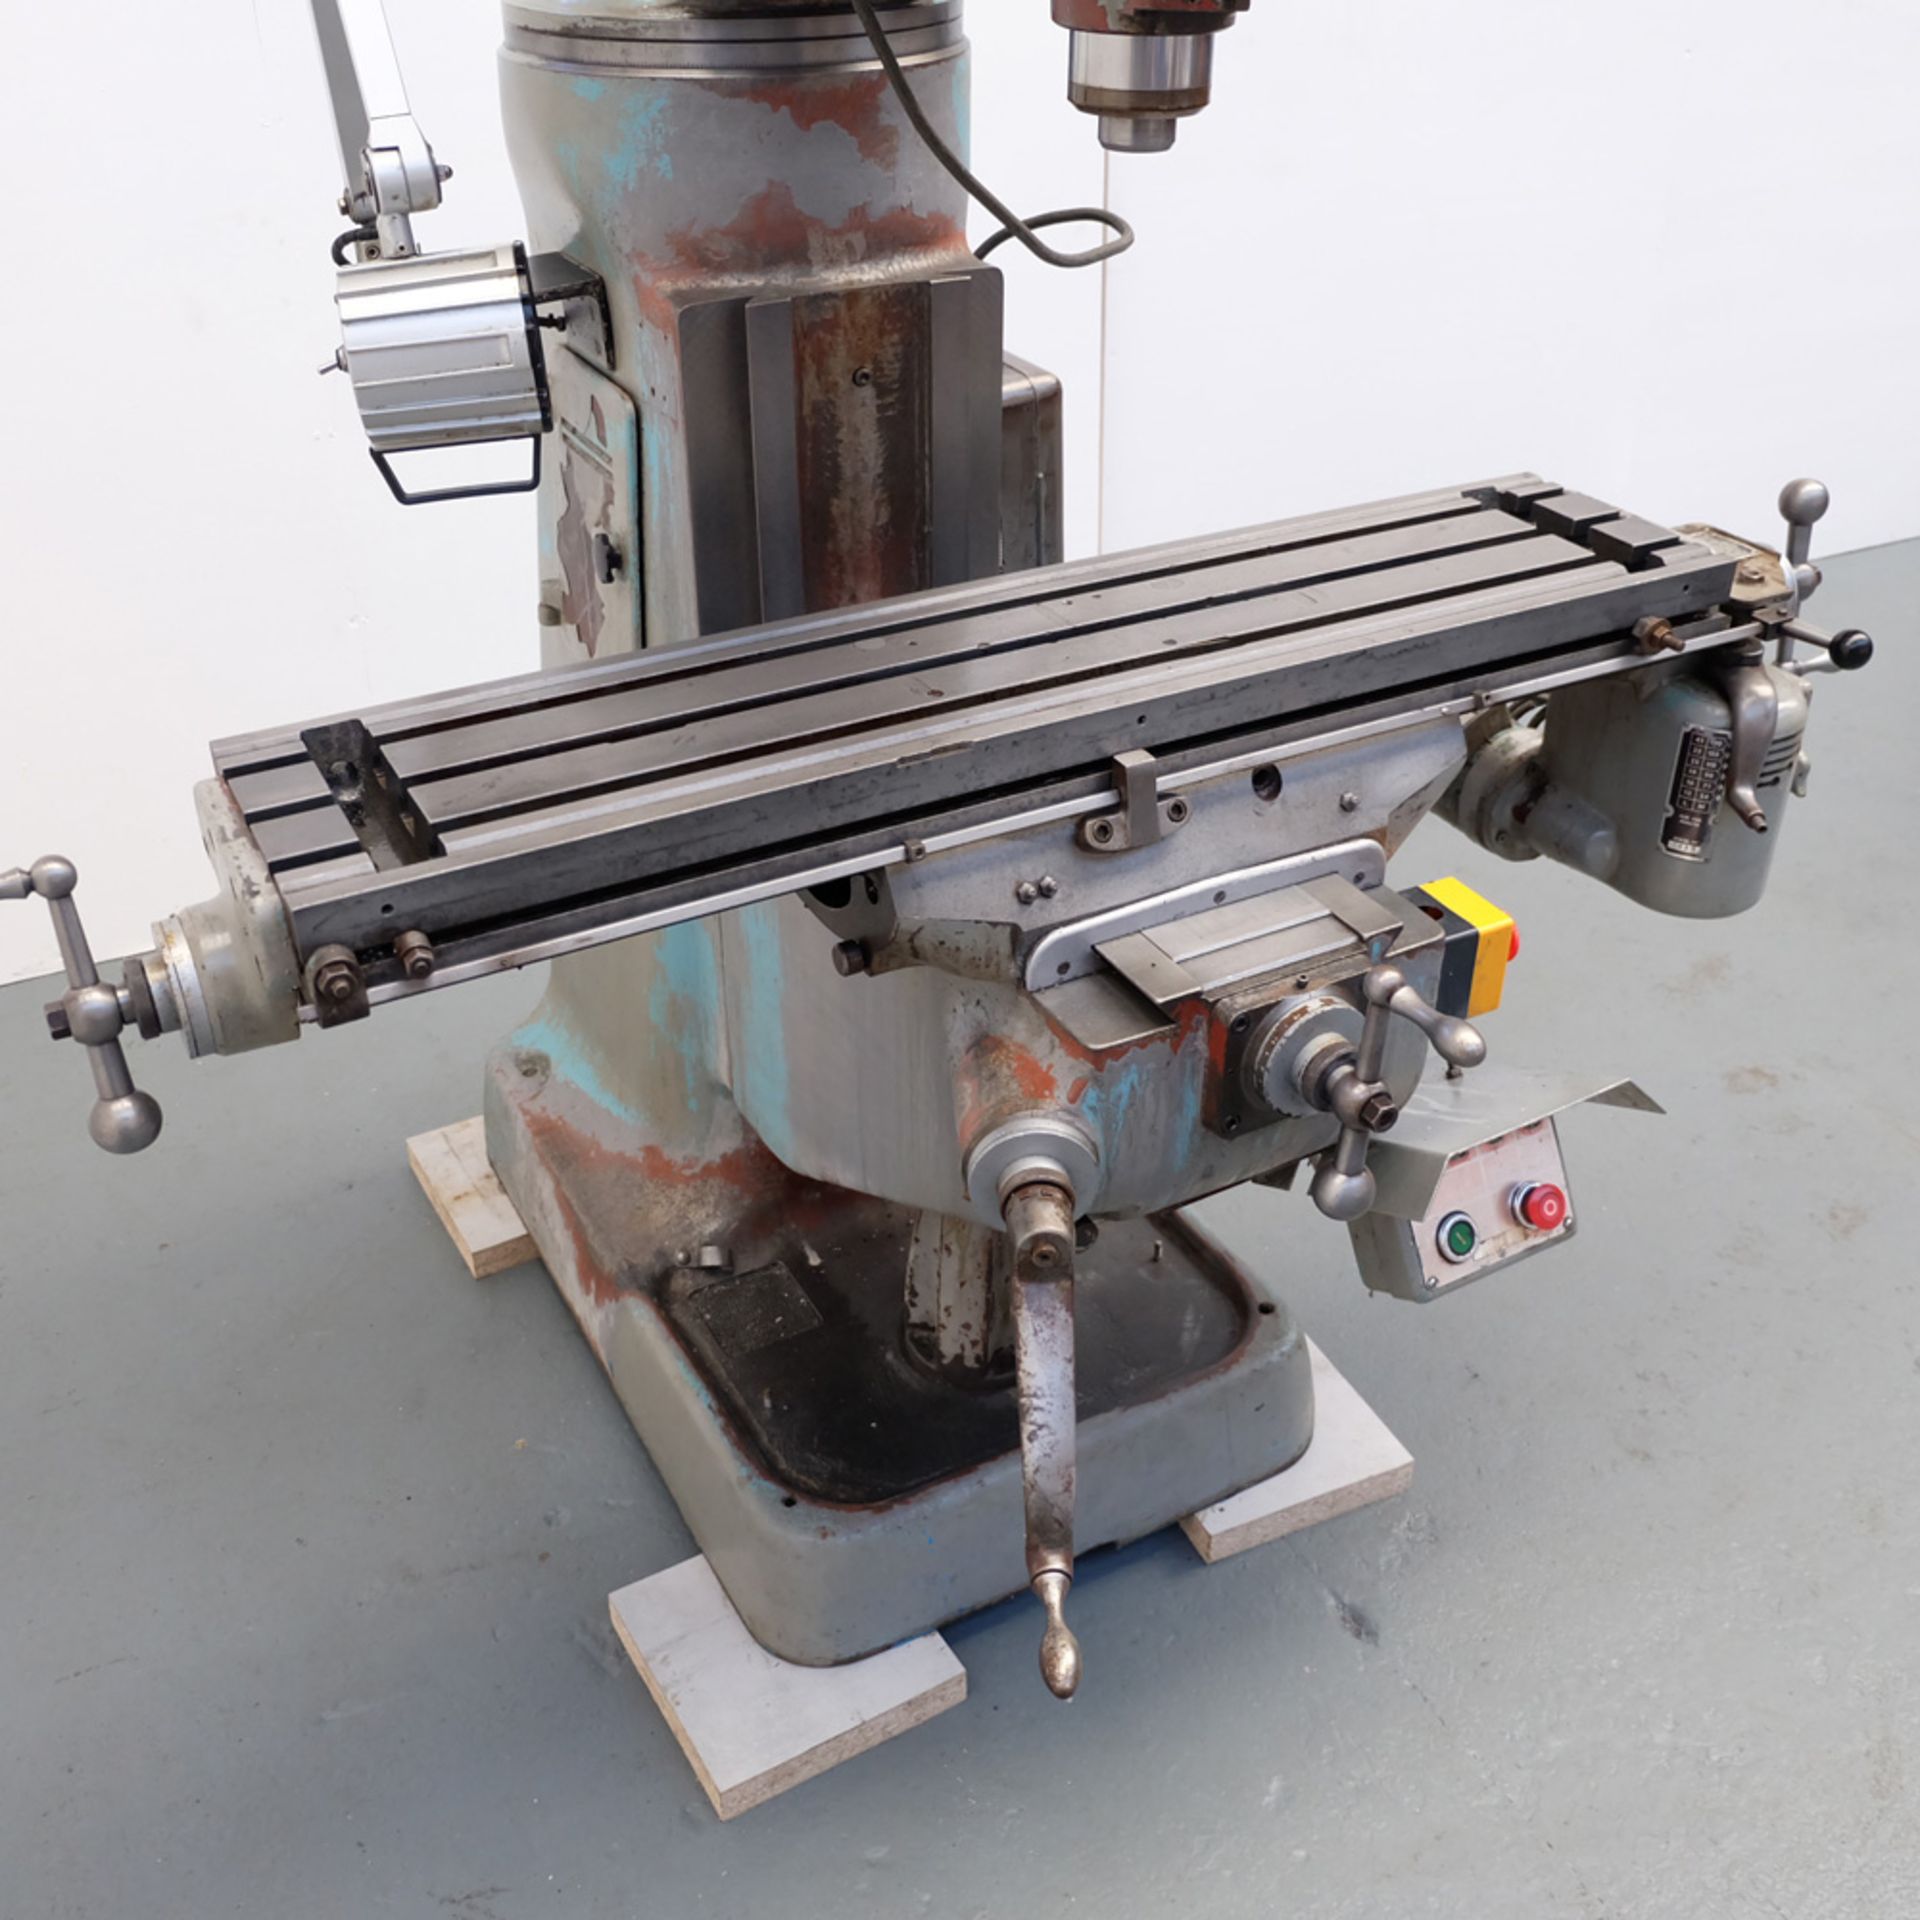 Bridgeport J Type Turret Milling Machine. Table Size 42" x 9". Spindle Taper R8. - Image 7 of 9